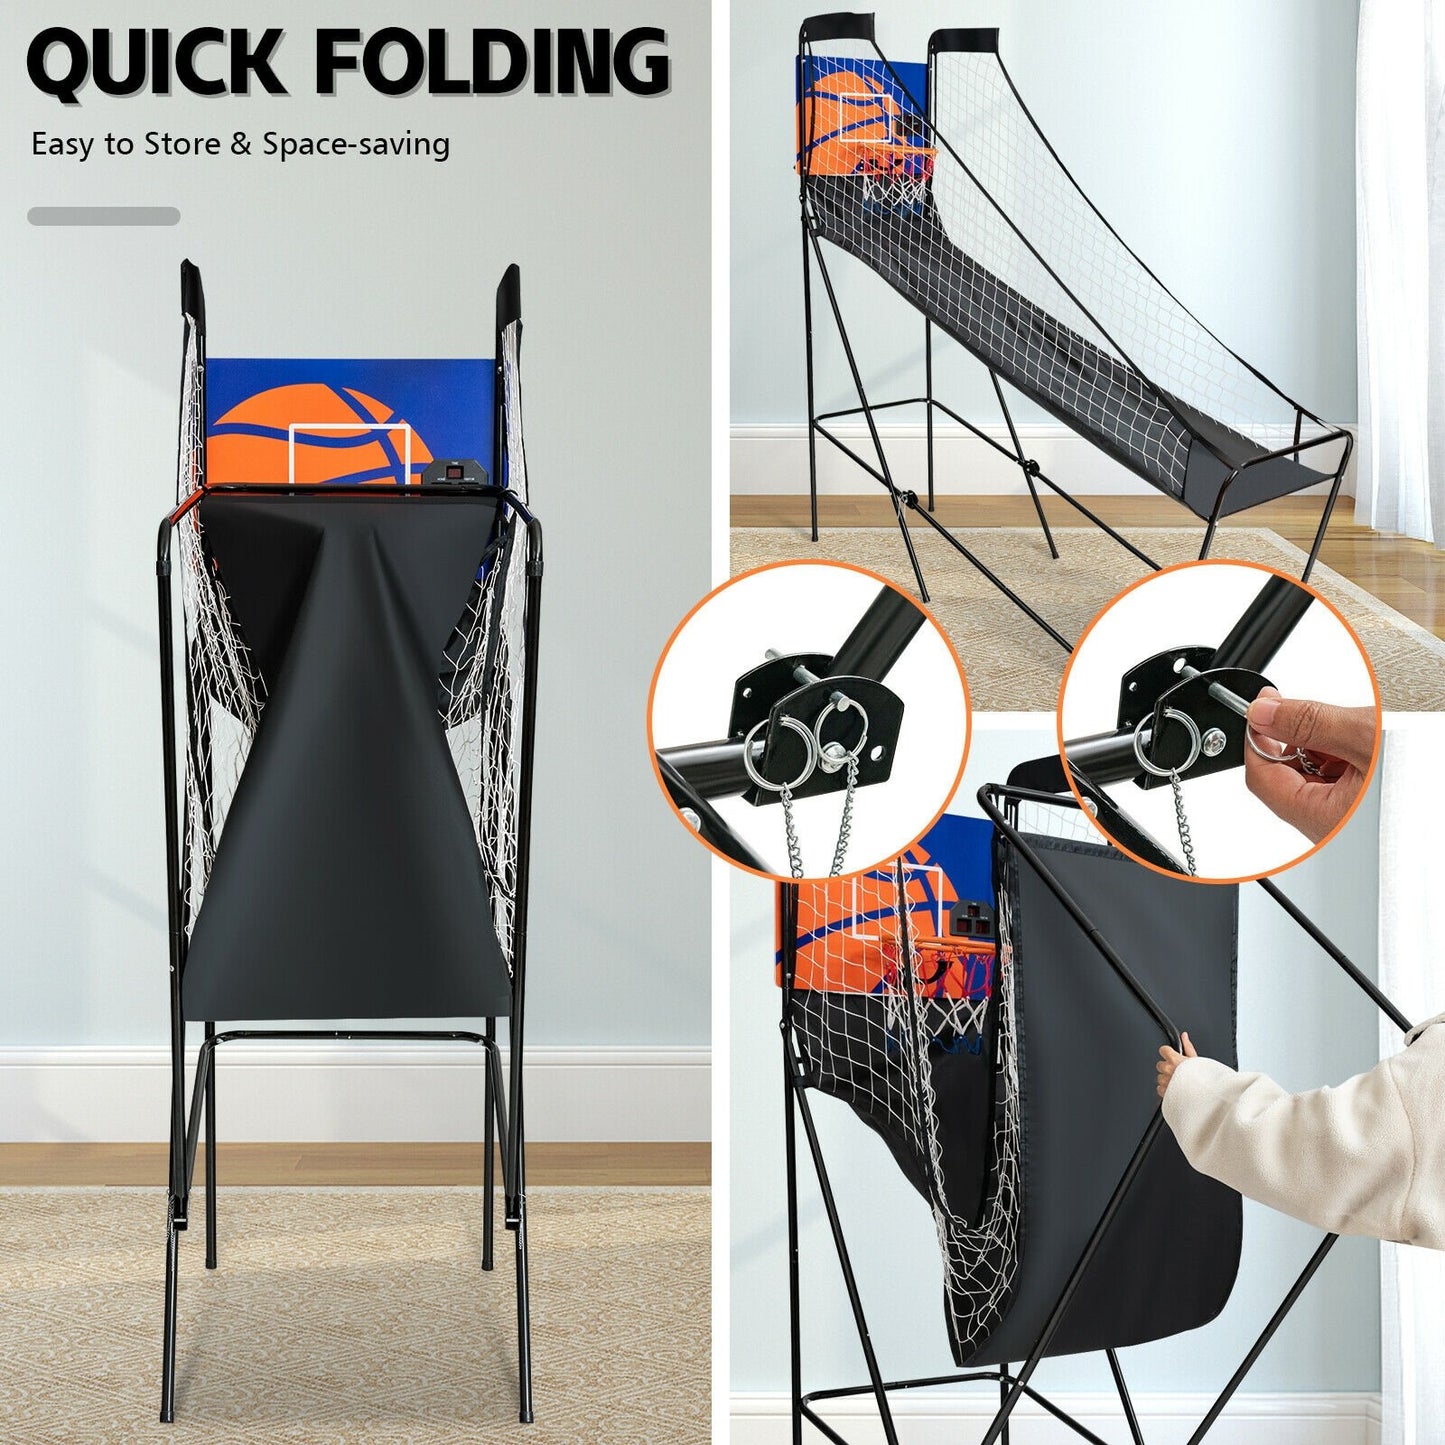 Foldable Single Shot Basketball Arcade Game with Electronic Scorer and Basketballs, Black at Gallery Canada